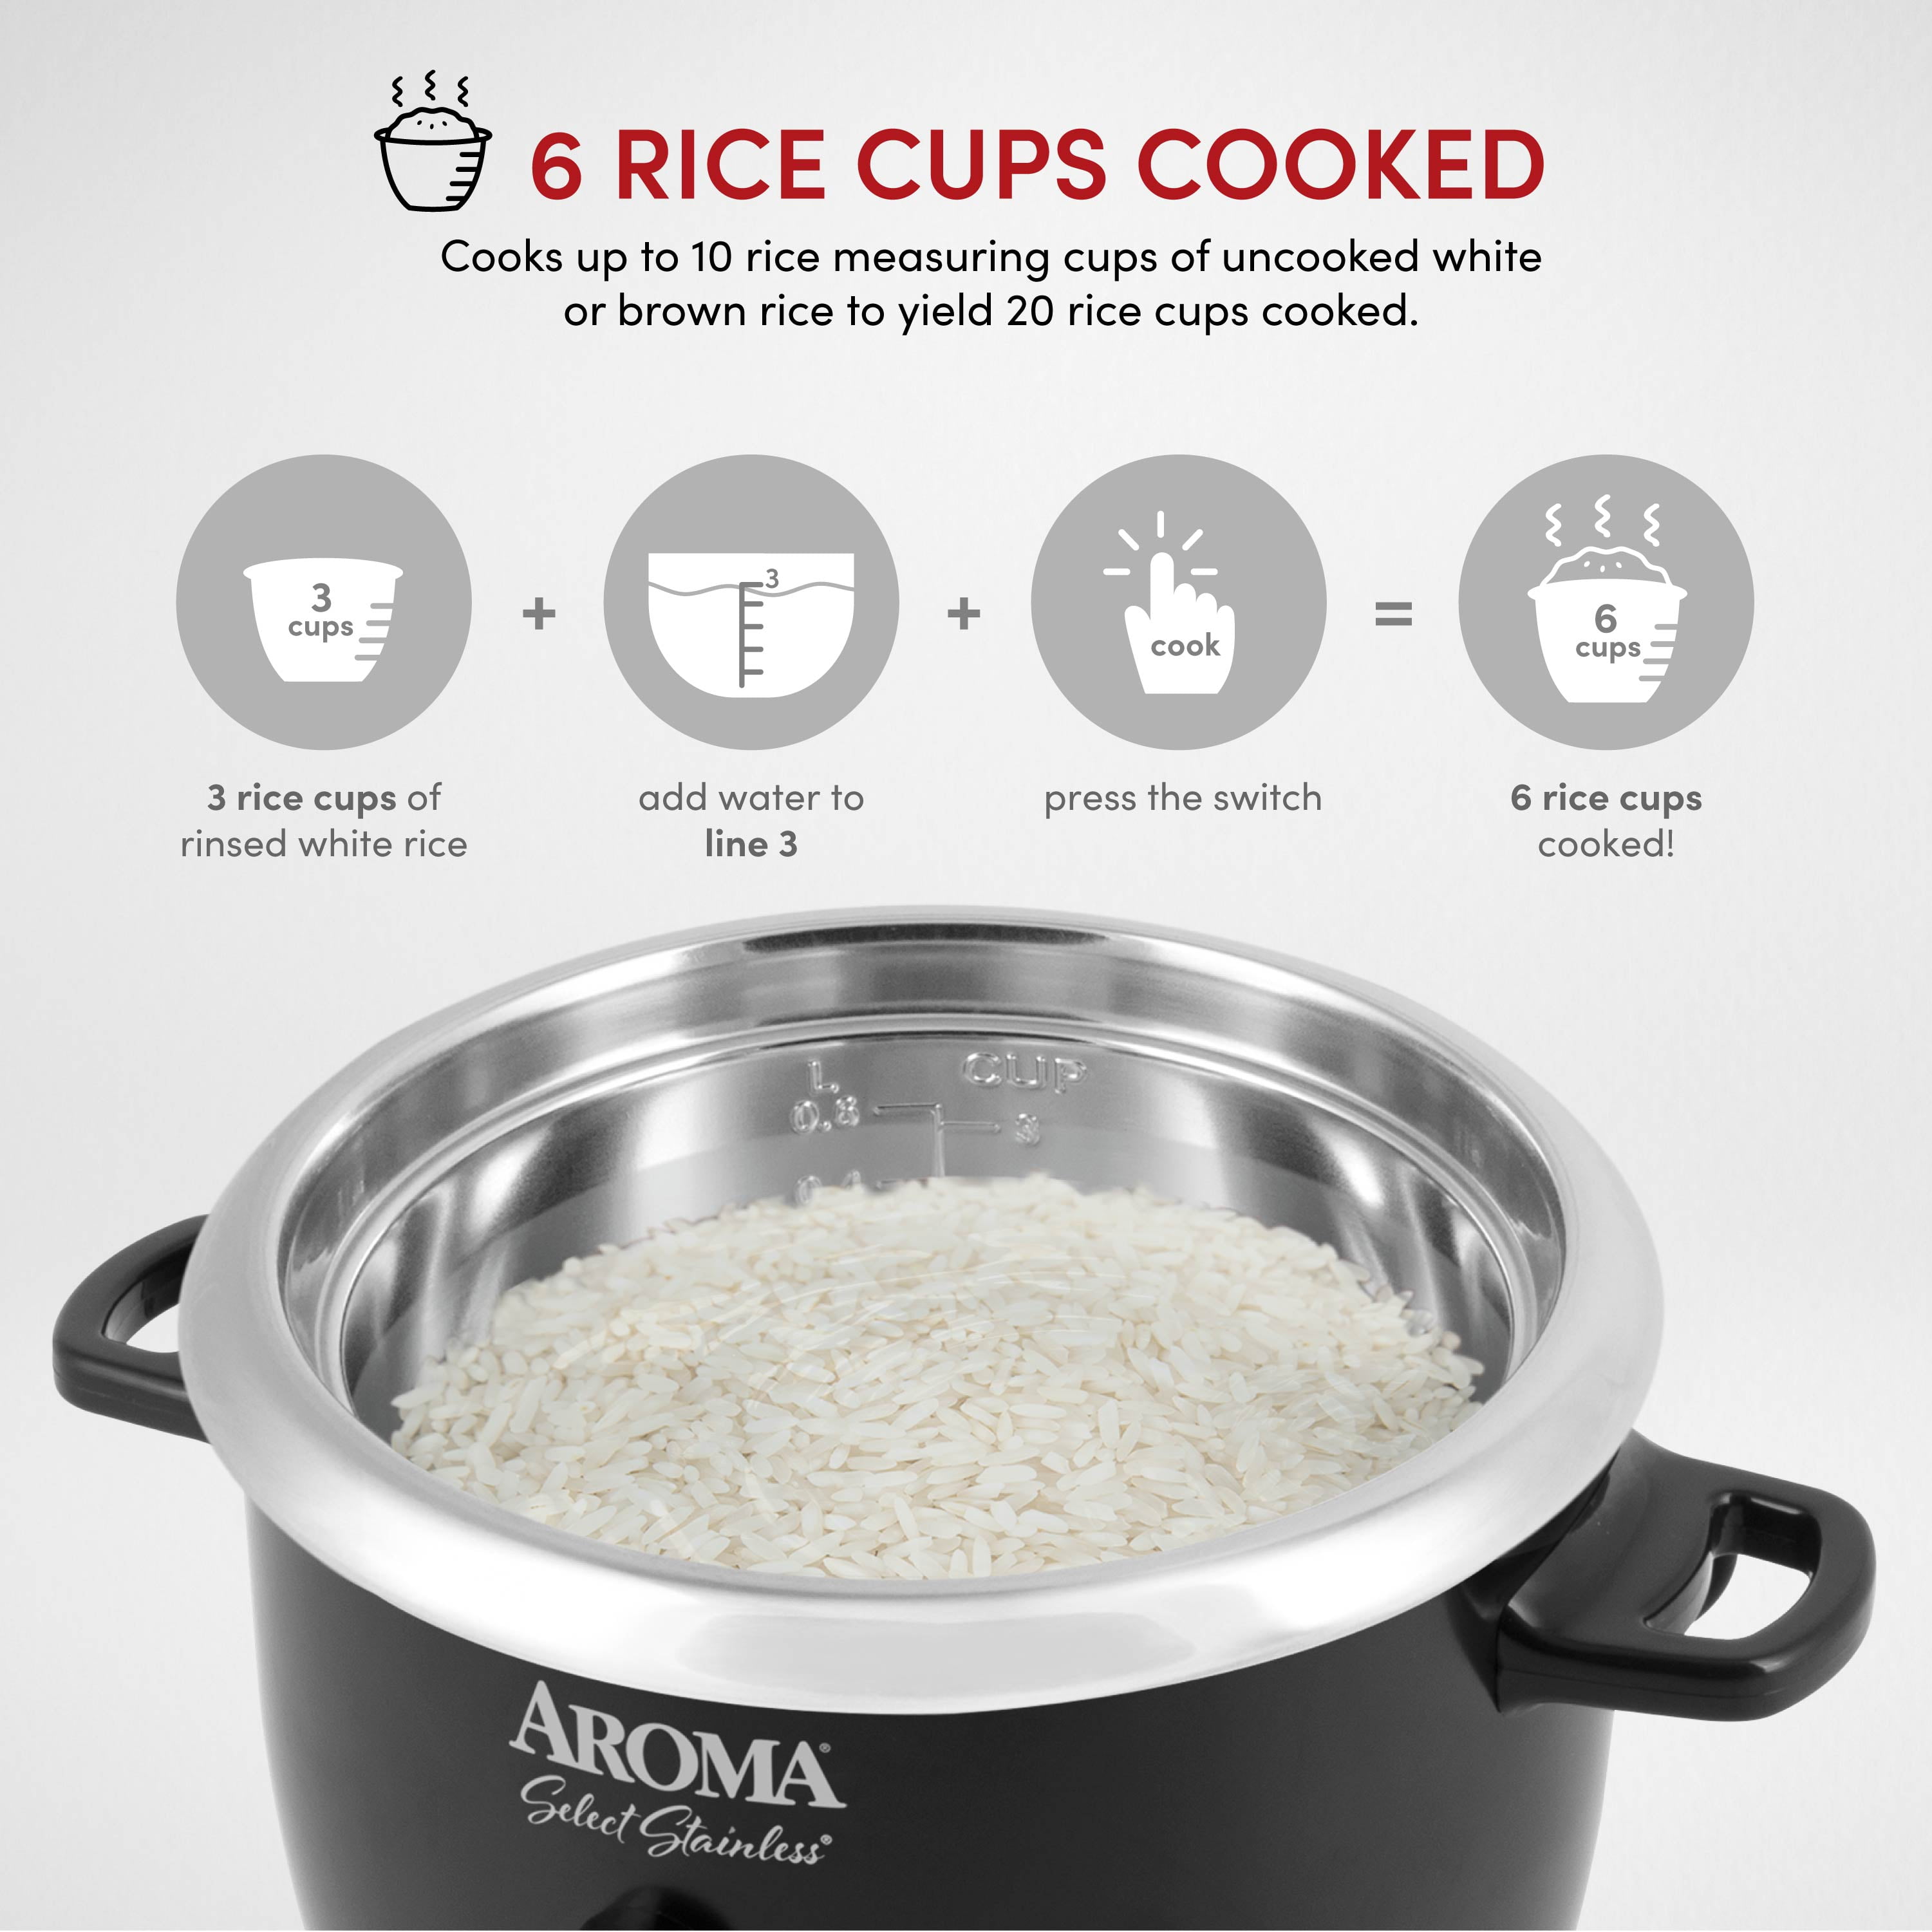 Aroma Simply Stainless Rice Cooker, White [Cooks 3 cups of